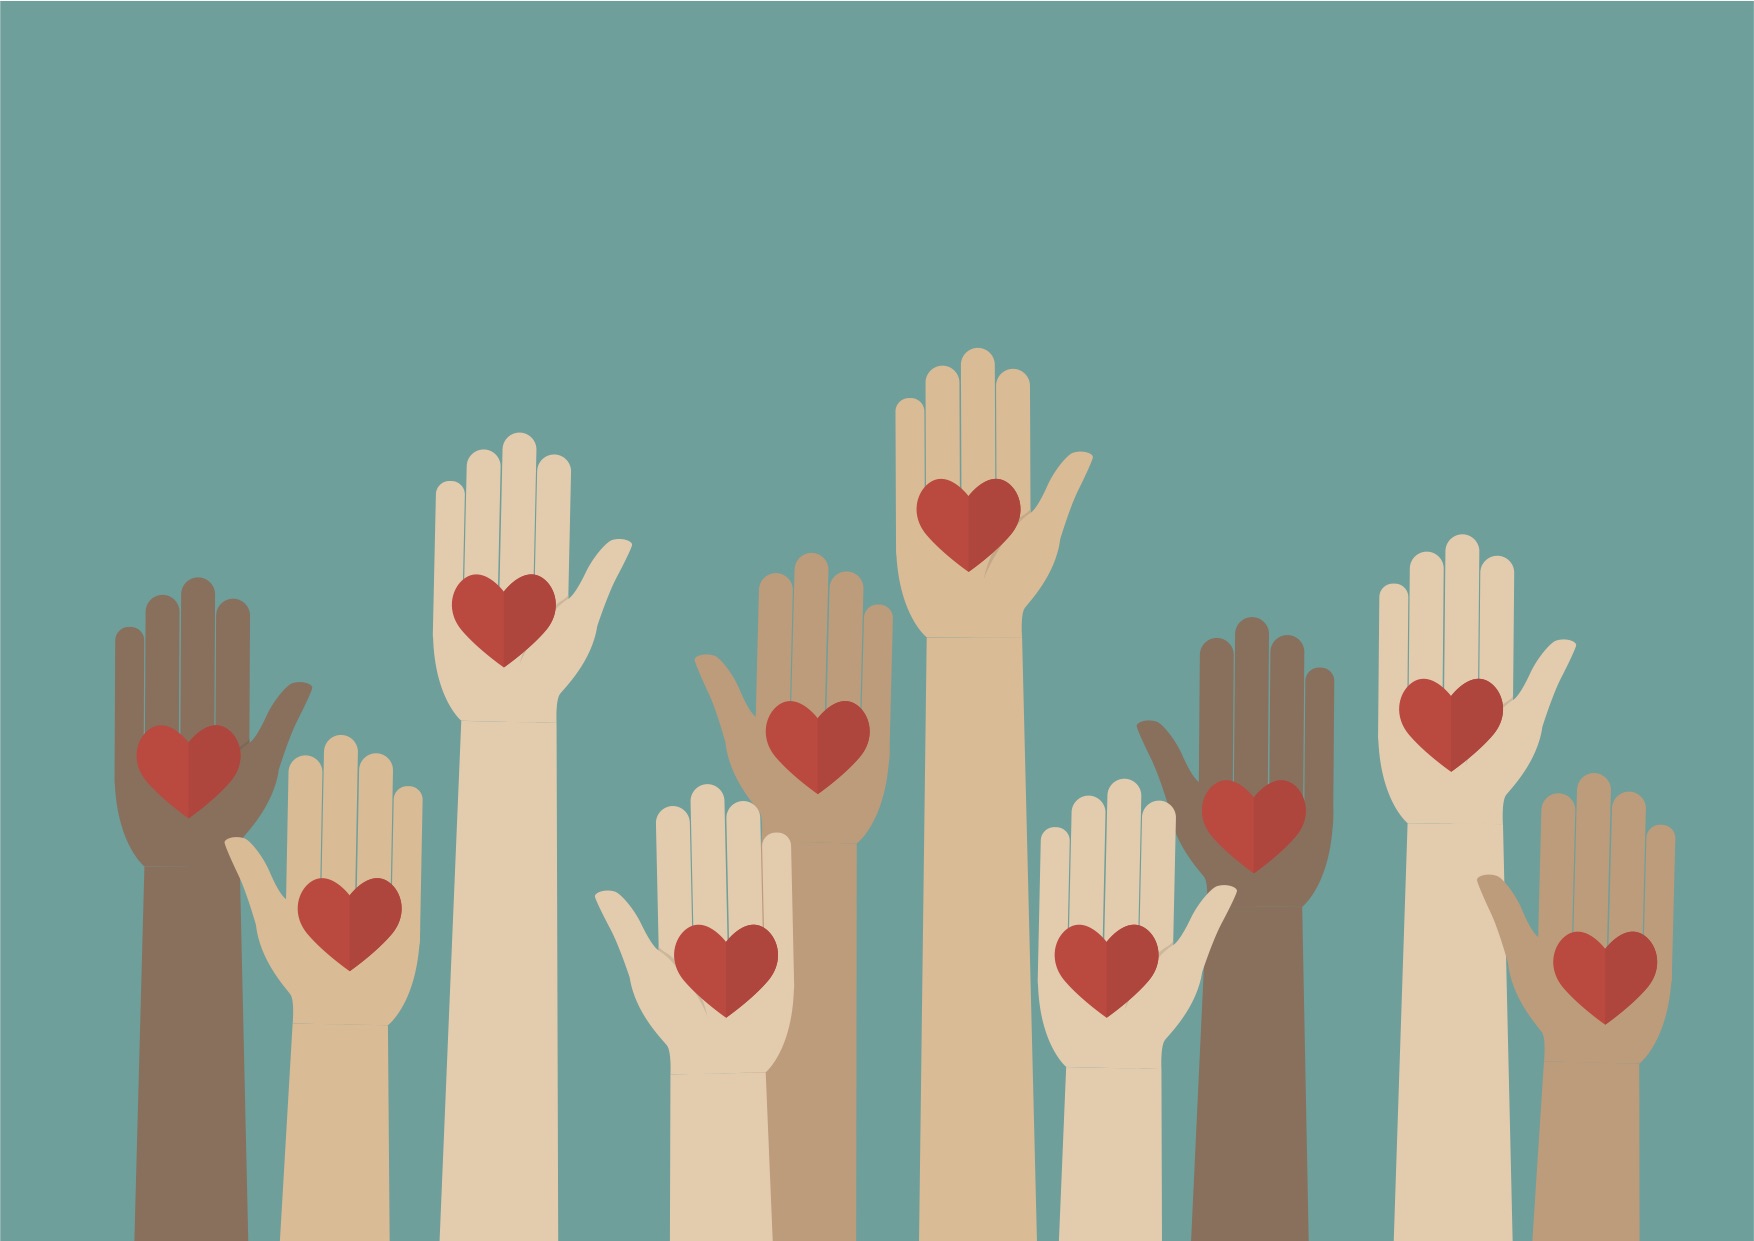 An illustration of raised hands, each with a heart on its palm.